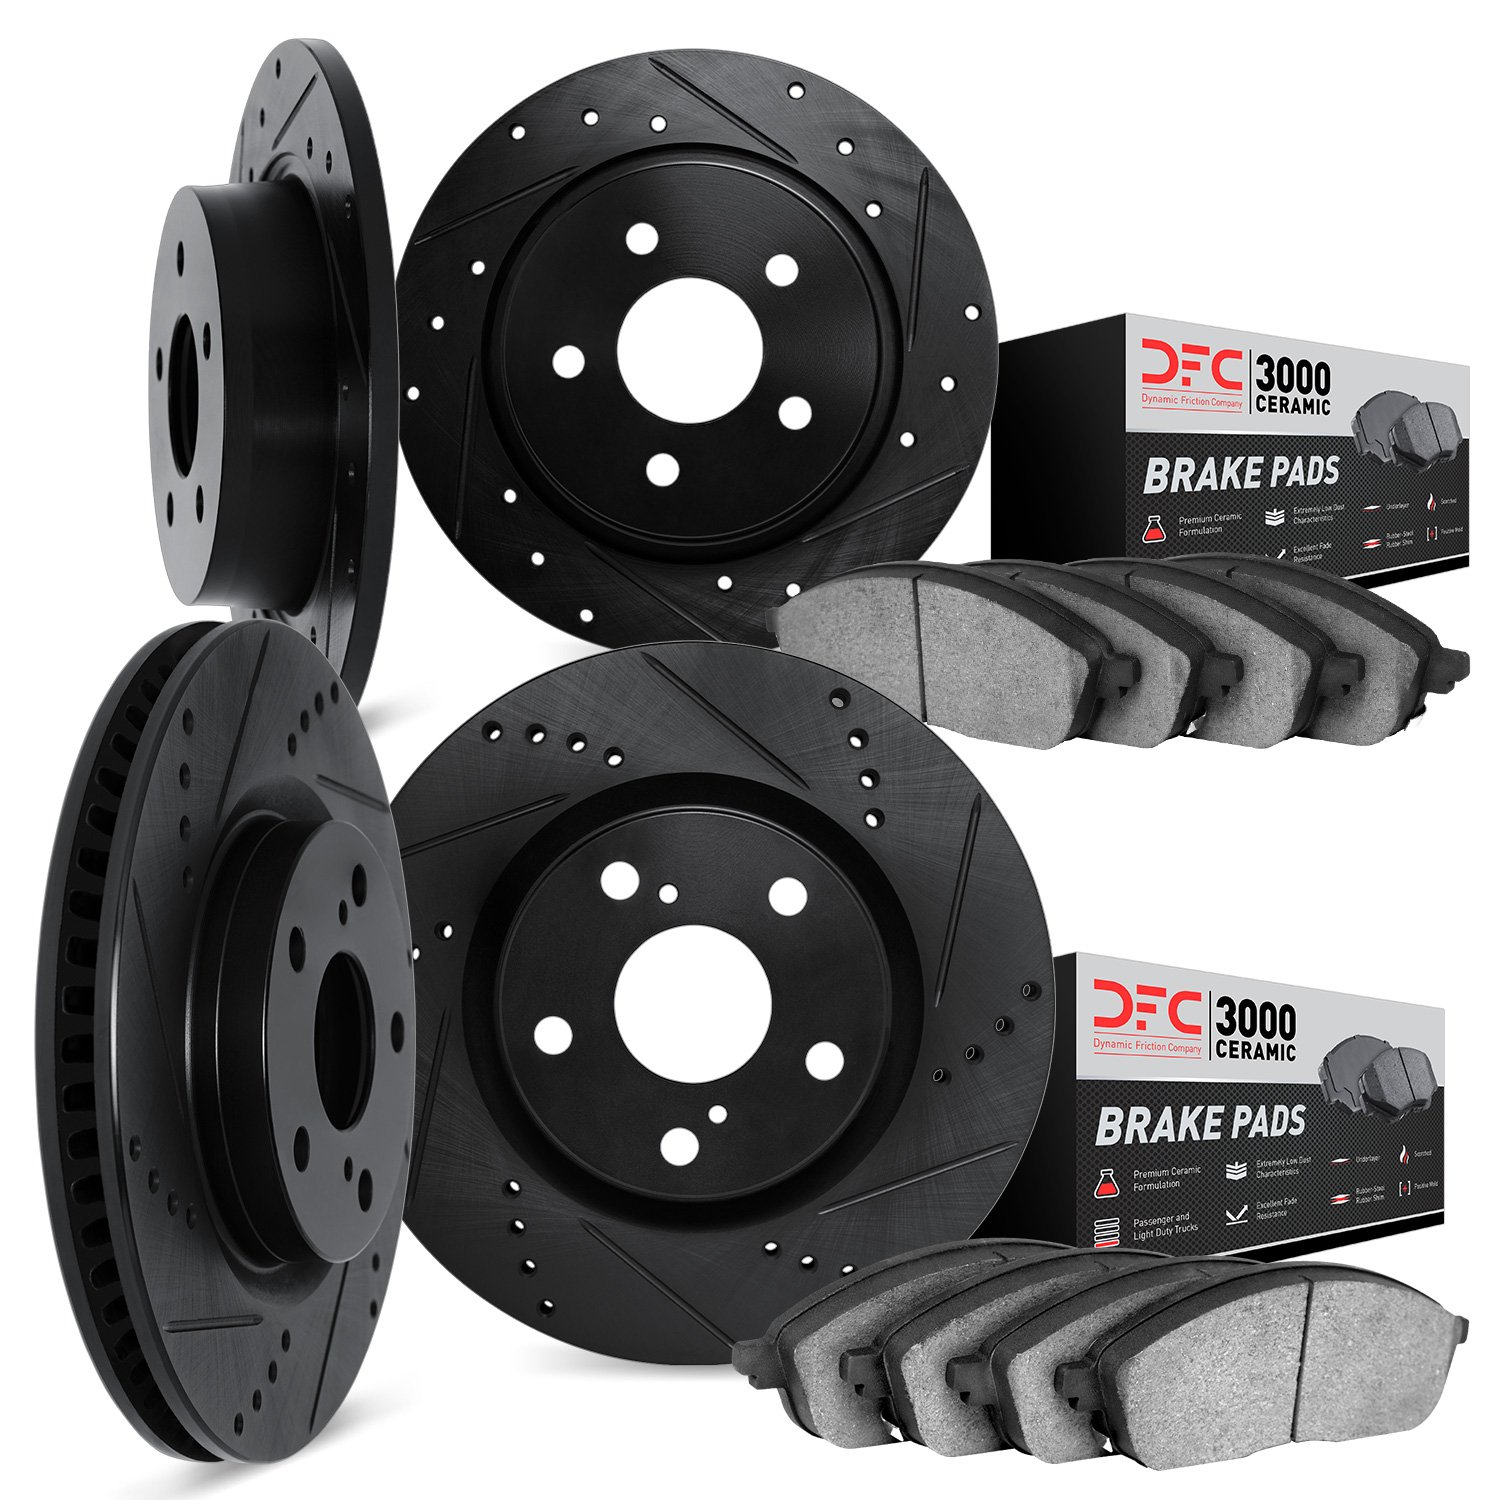 8304-13028 Drilled/Slotted Brake Rotors with 3000-Series Ceramic Brake Pads Kit [Black], 2009-2012 Subaru, Position: Front and R